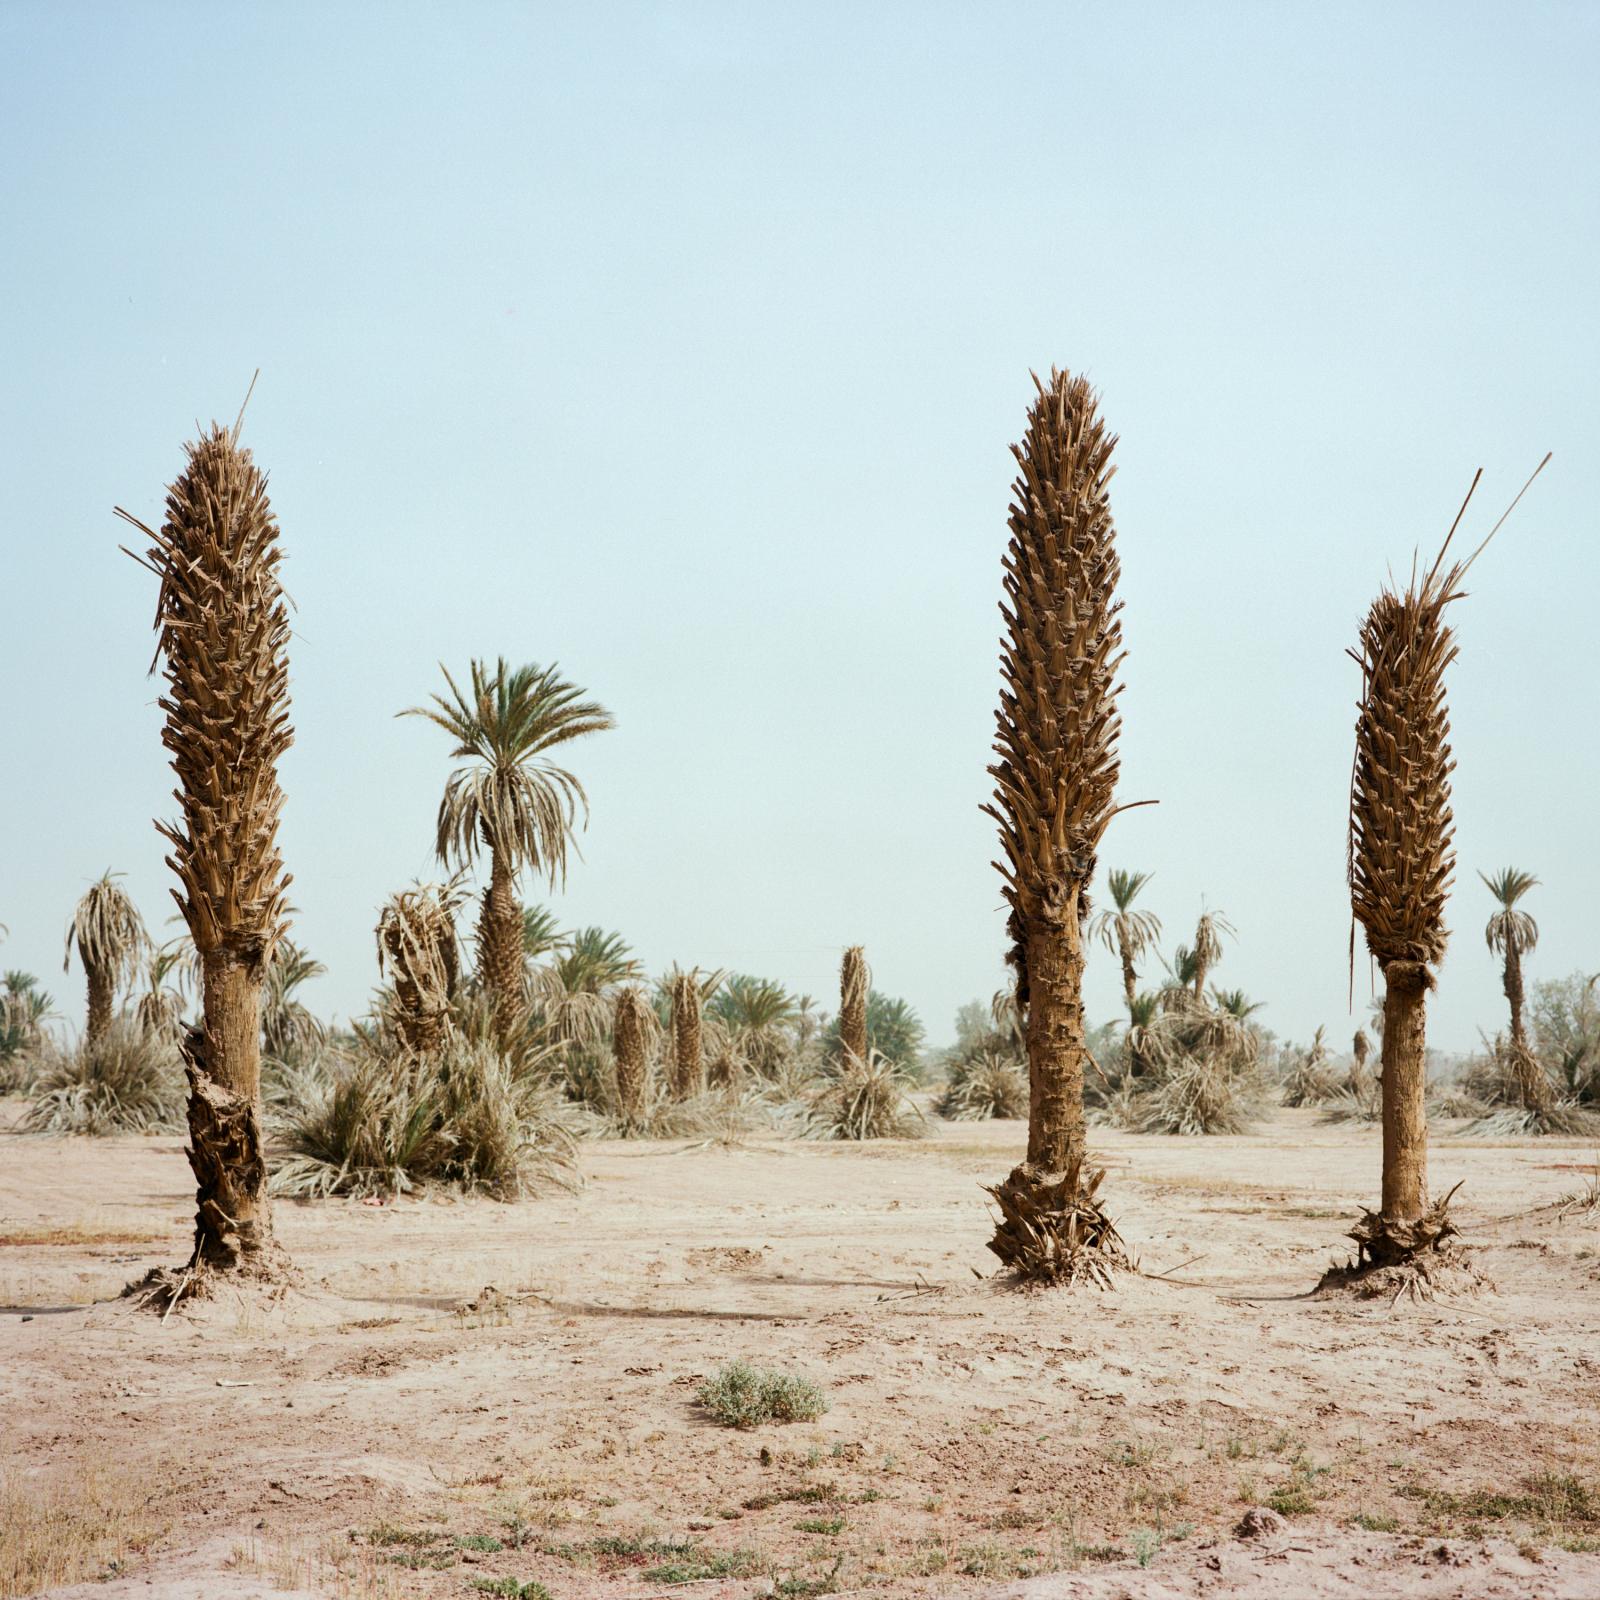 Before it's gone  - Dead palm trees at the edge of the oasis of M'hamid...